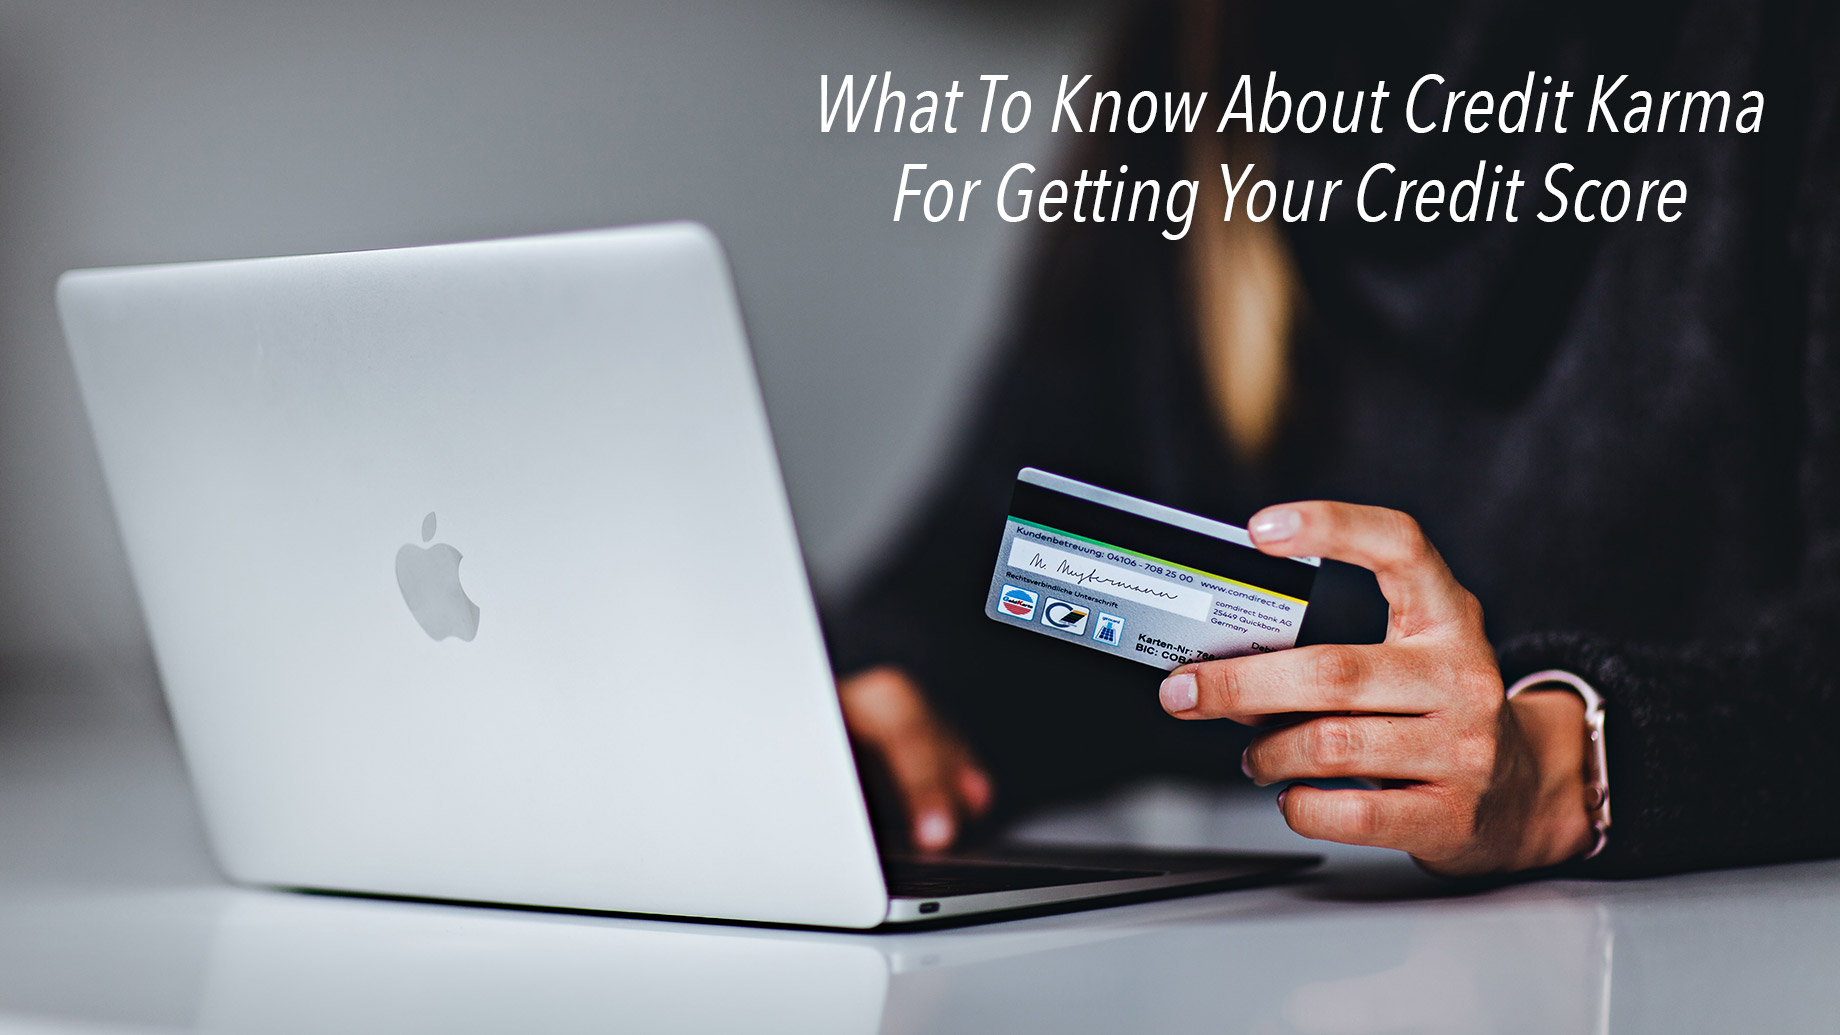 What To Know About Credit Karma For Getting Your Credit Score